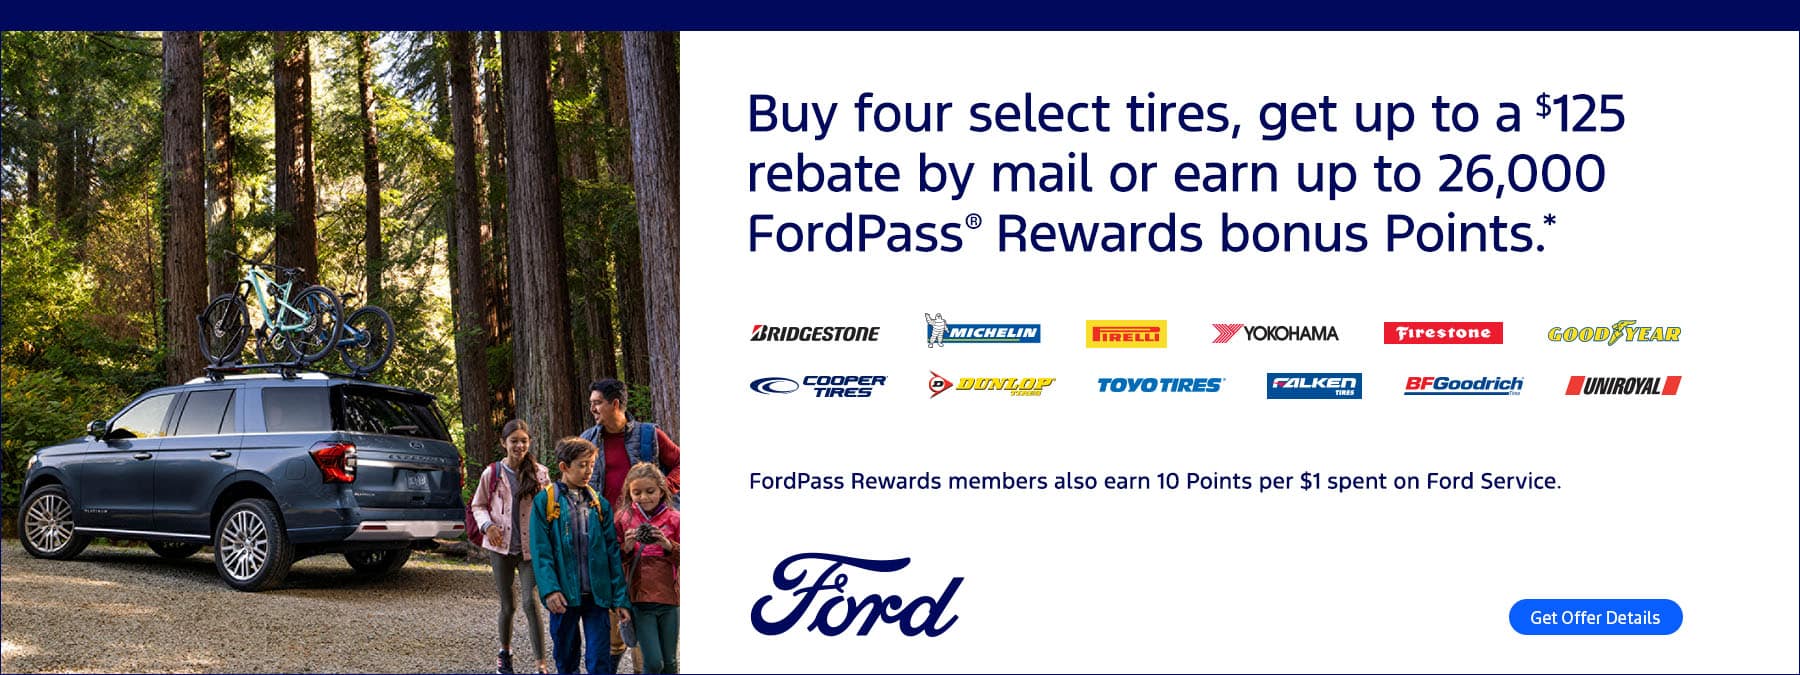 Ford Tire offer